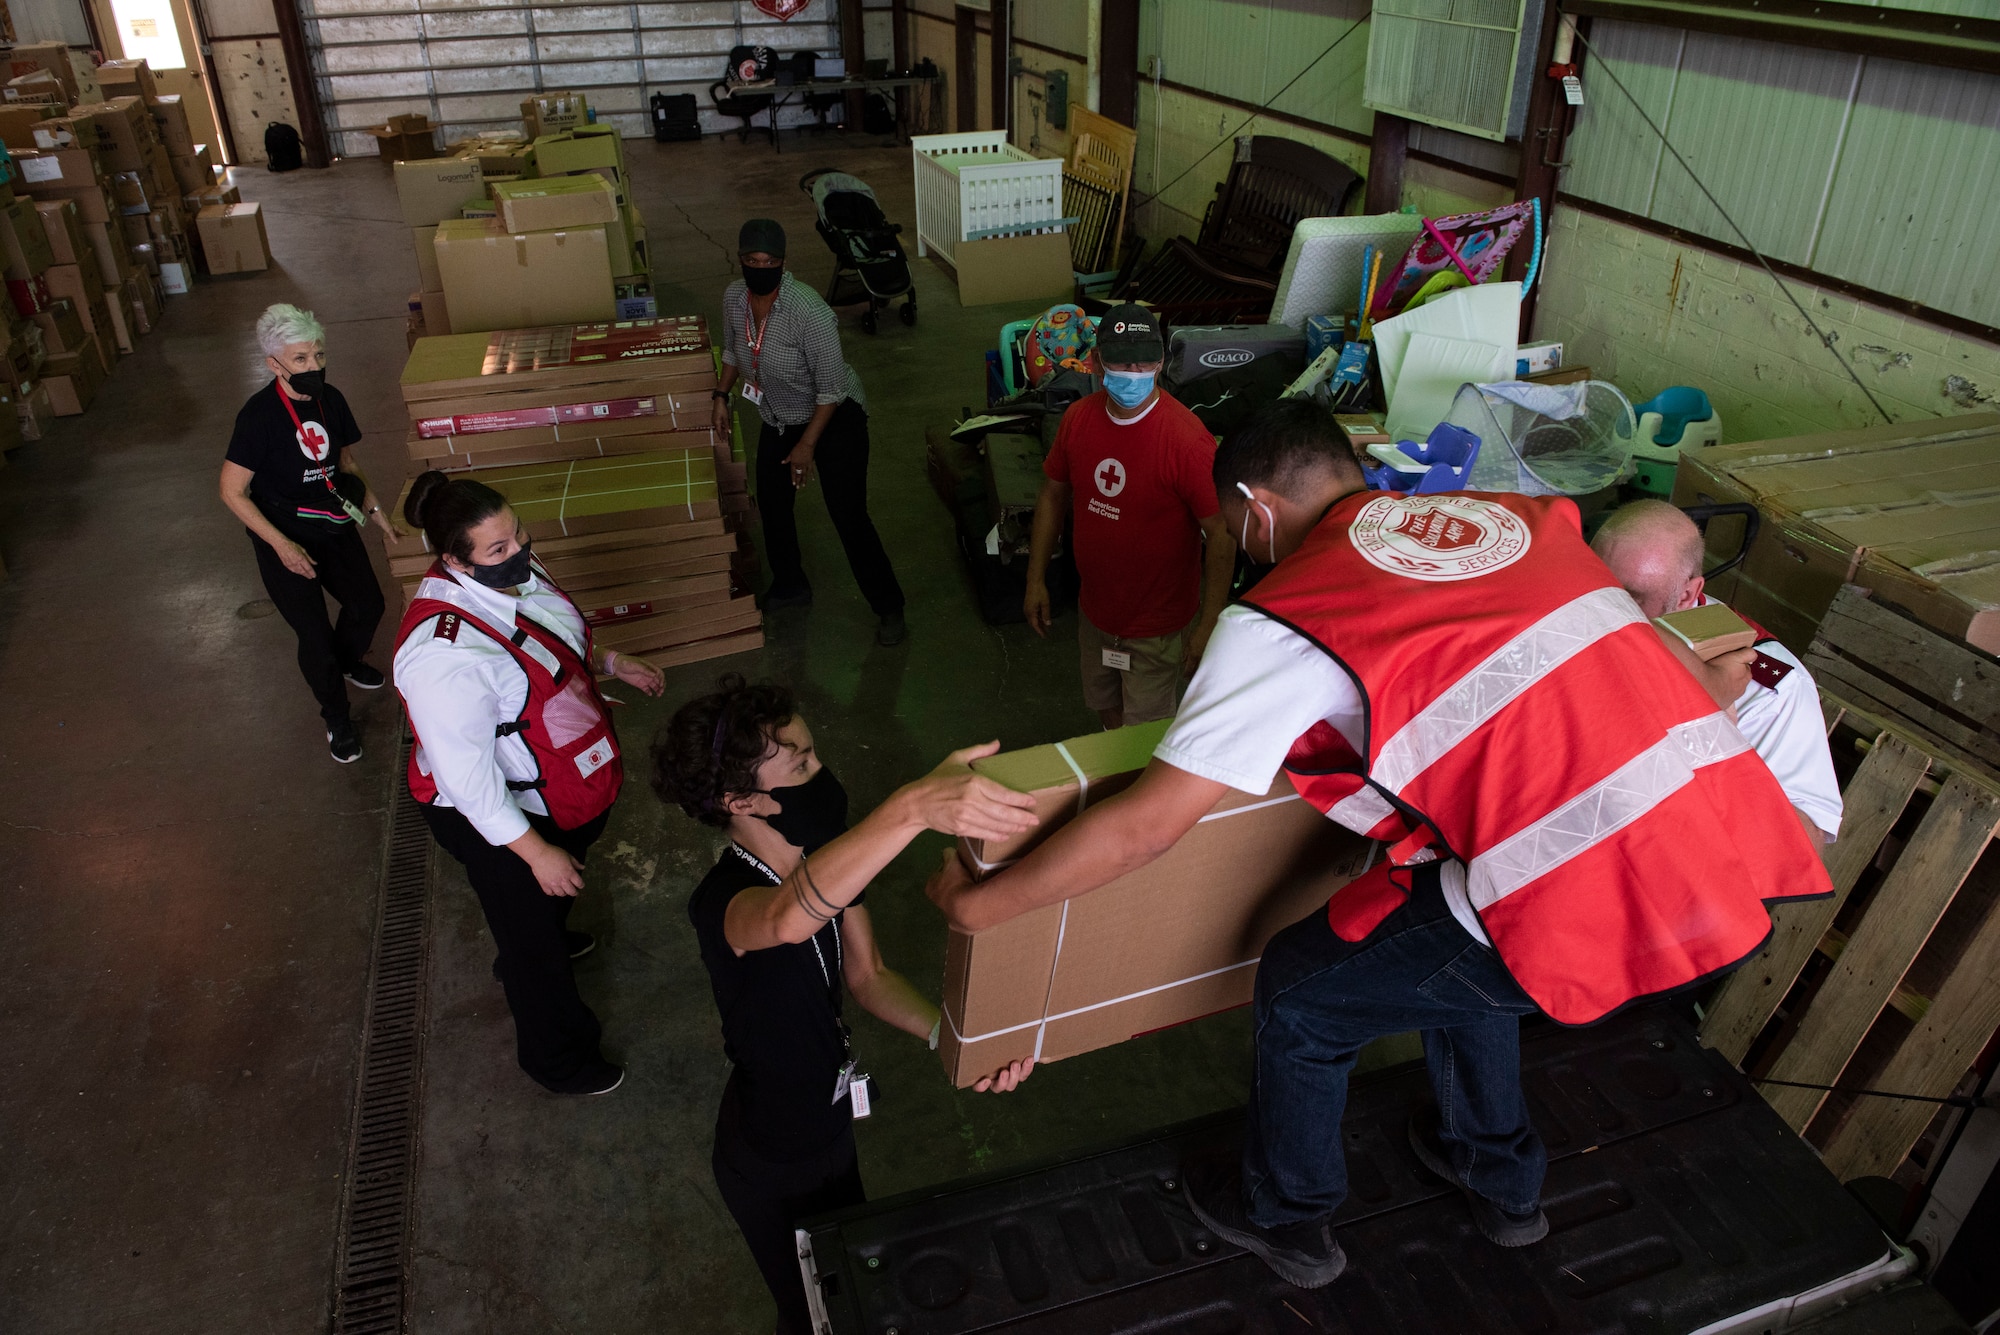 Volunteers from the Salvation Army and the Red Cross unload shelves in a warehouse at Holloman Air Force Base, New Mexico, Sept. 4, 2021. The Department of Defense, through U.S. Northern Command, and in support of the Department of State and Department of Homeland Security, is providing transportation, temporary housing, medical screening, and general support for at least 50,000 Afghan evacuees at suitable facilities, in permanent or temporary structures, as quickly as possible. This initiative provides Afghan evacuees essential support at secure locations outside Afghanistan. (U.S. Air Force photo by Staff Sgt. Kenneth Boyton)